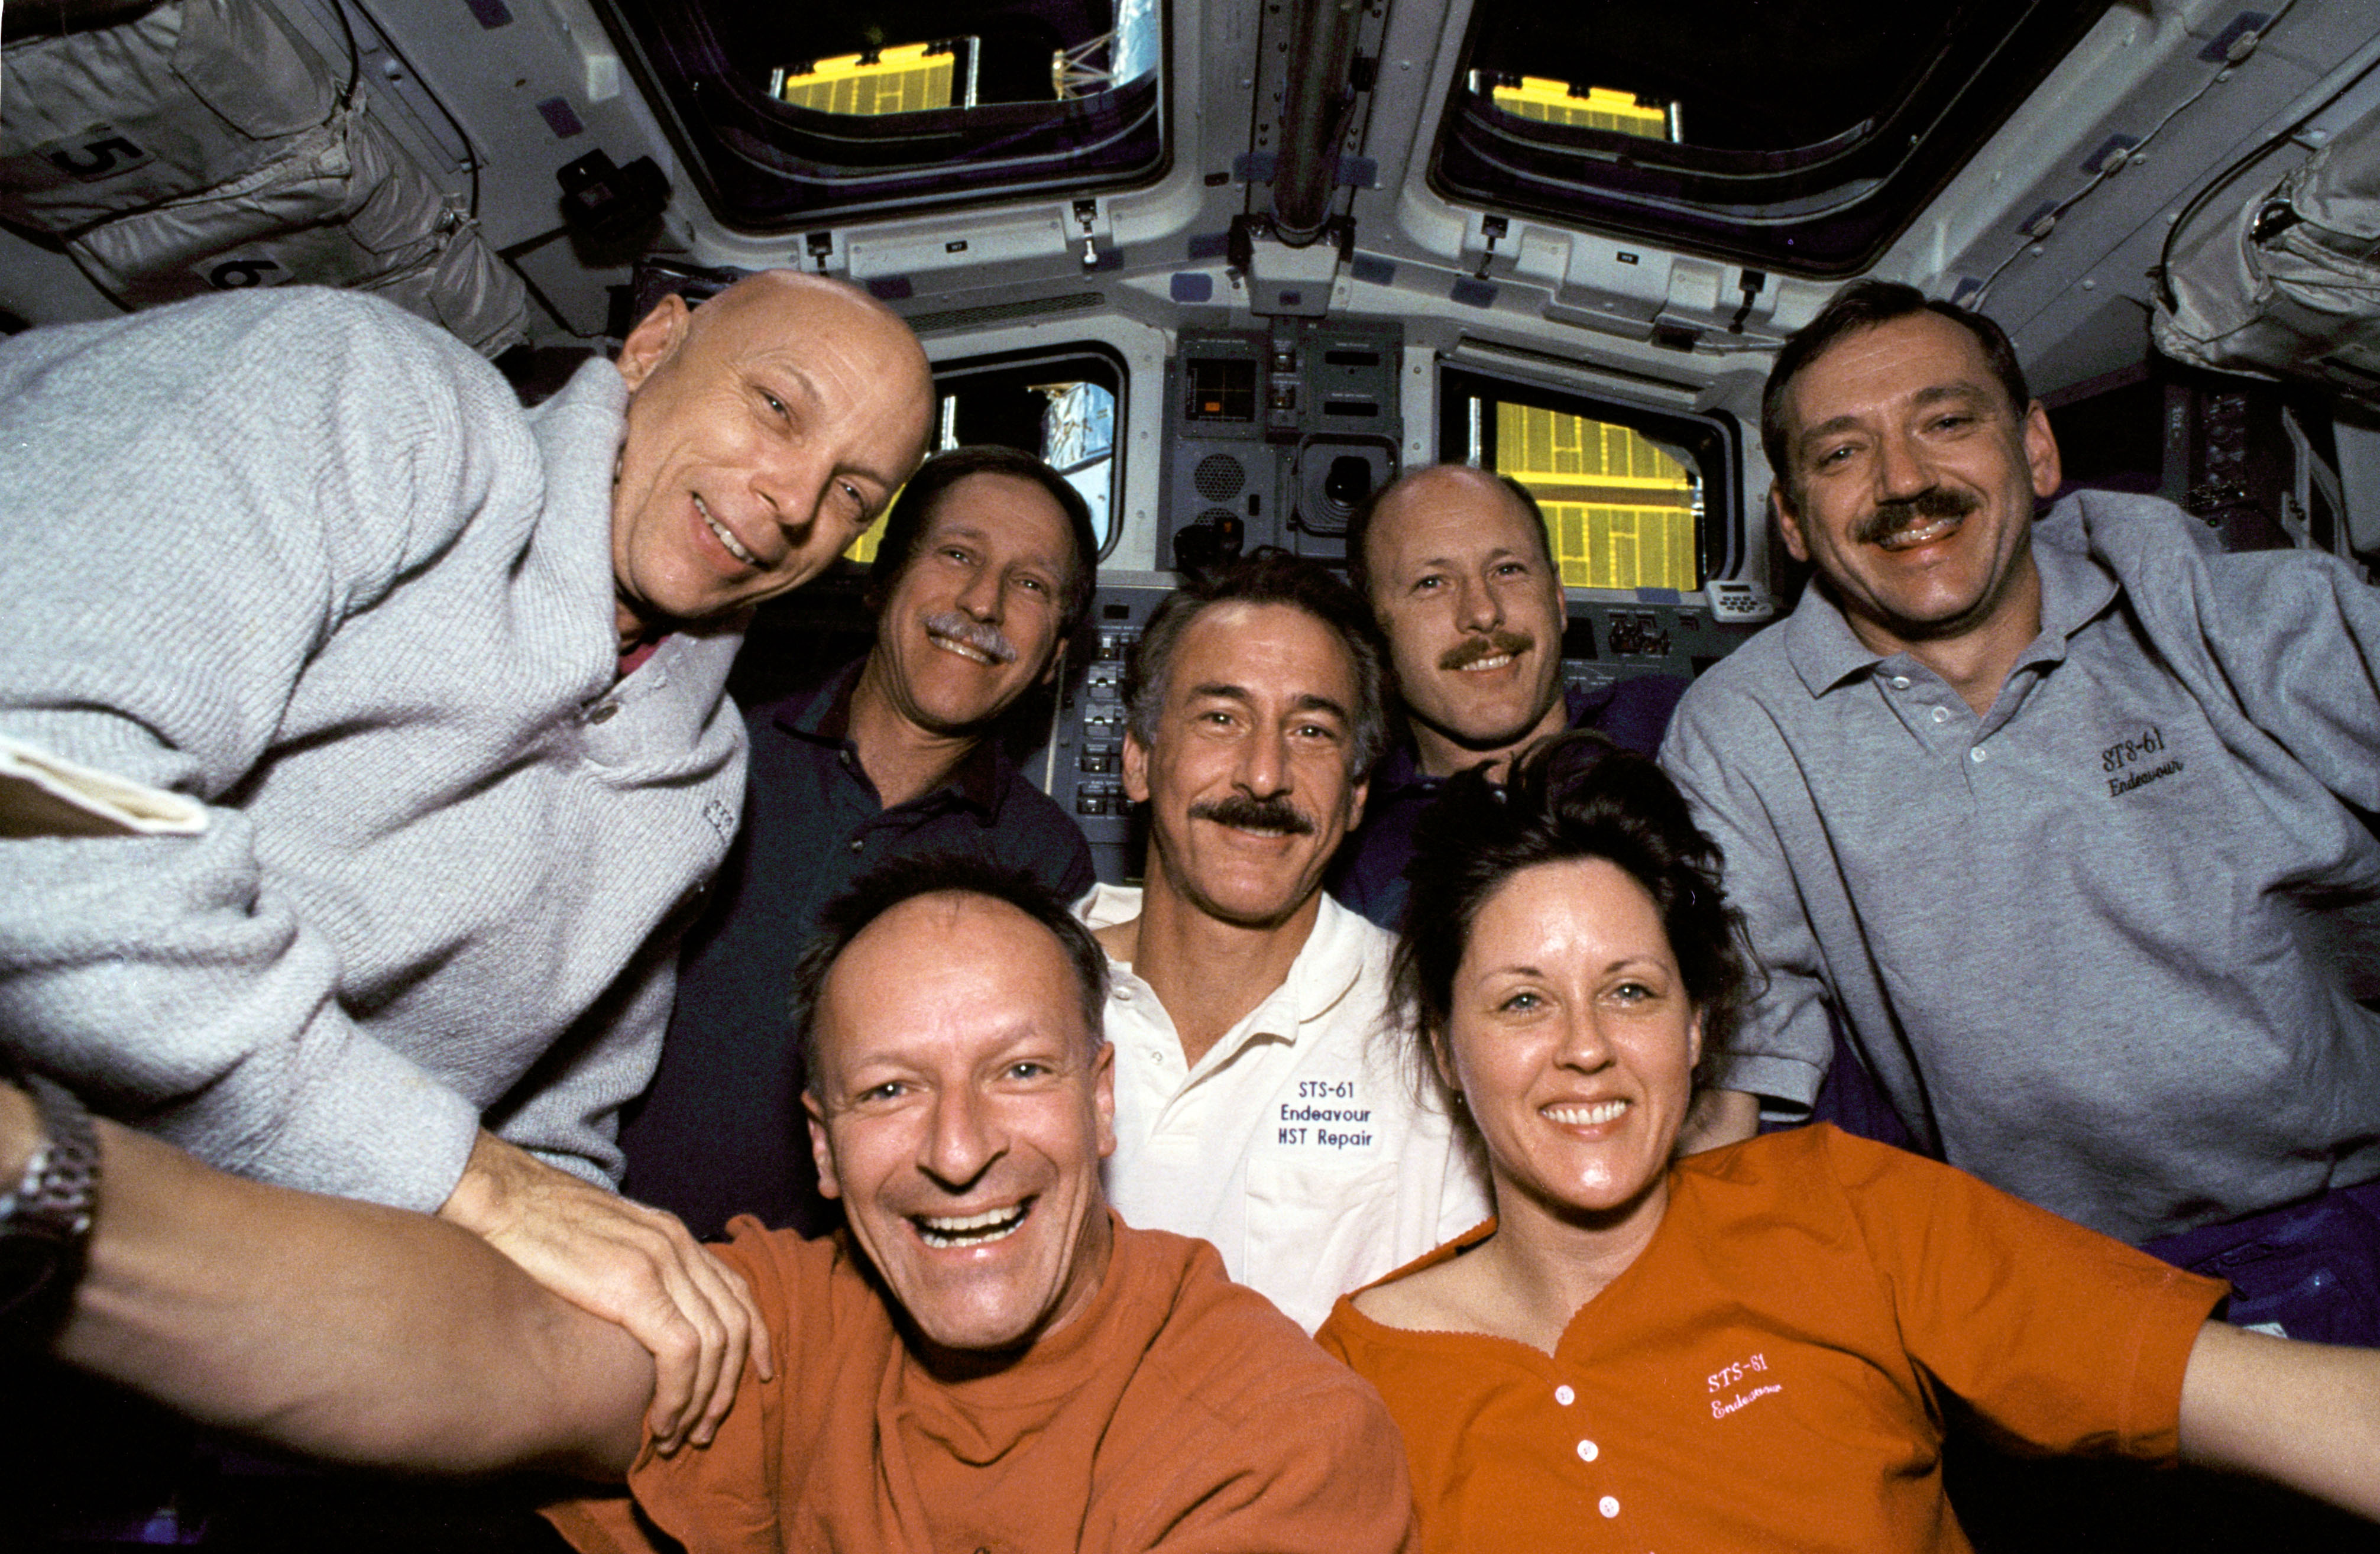 The STS-61 crew poses on Endeavour’s flight deck, with Hubble visible through the windows